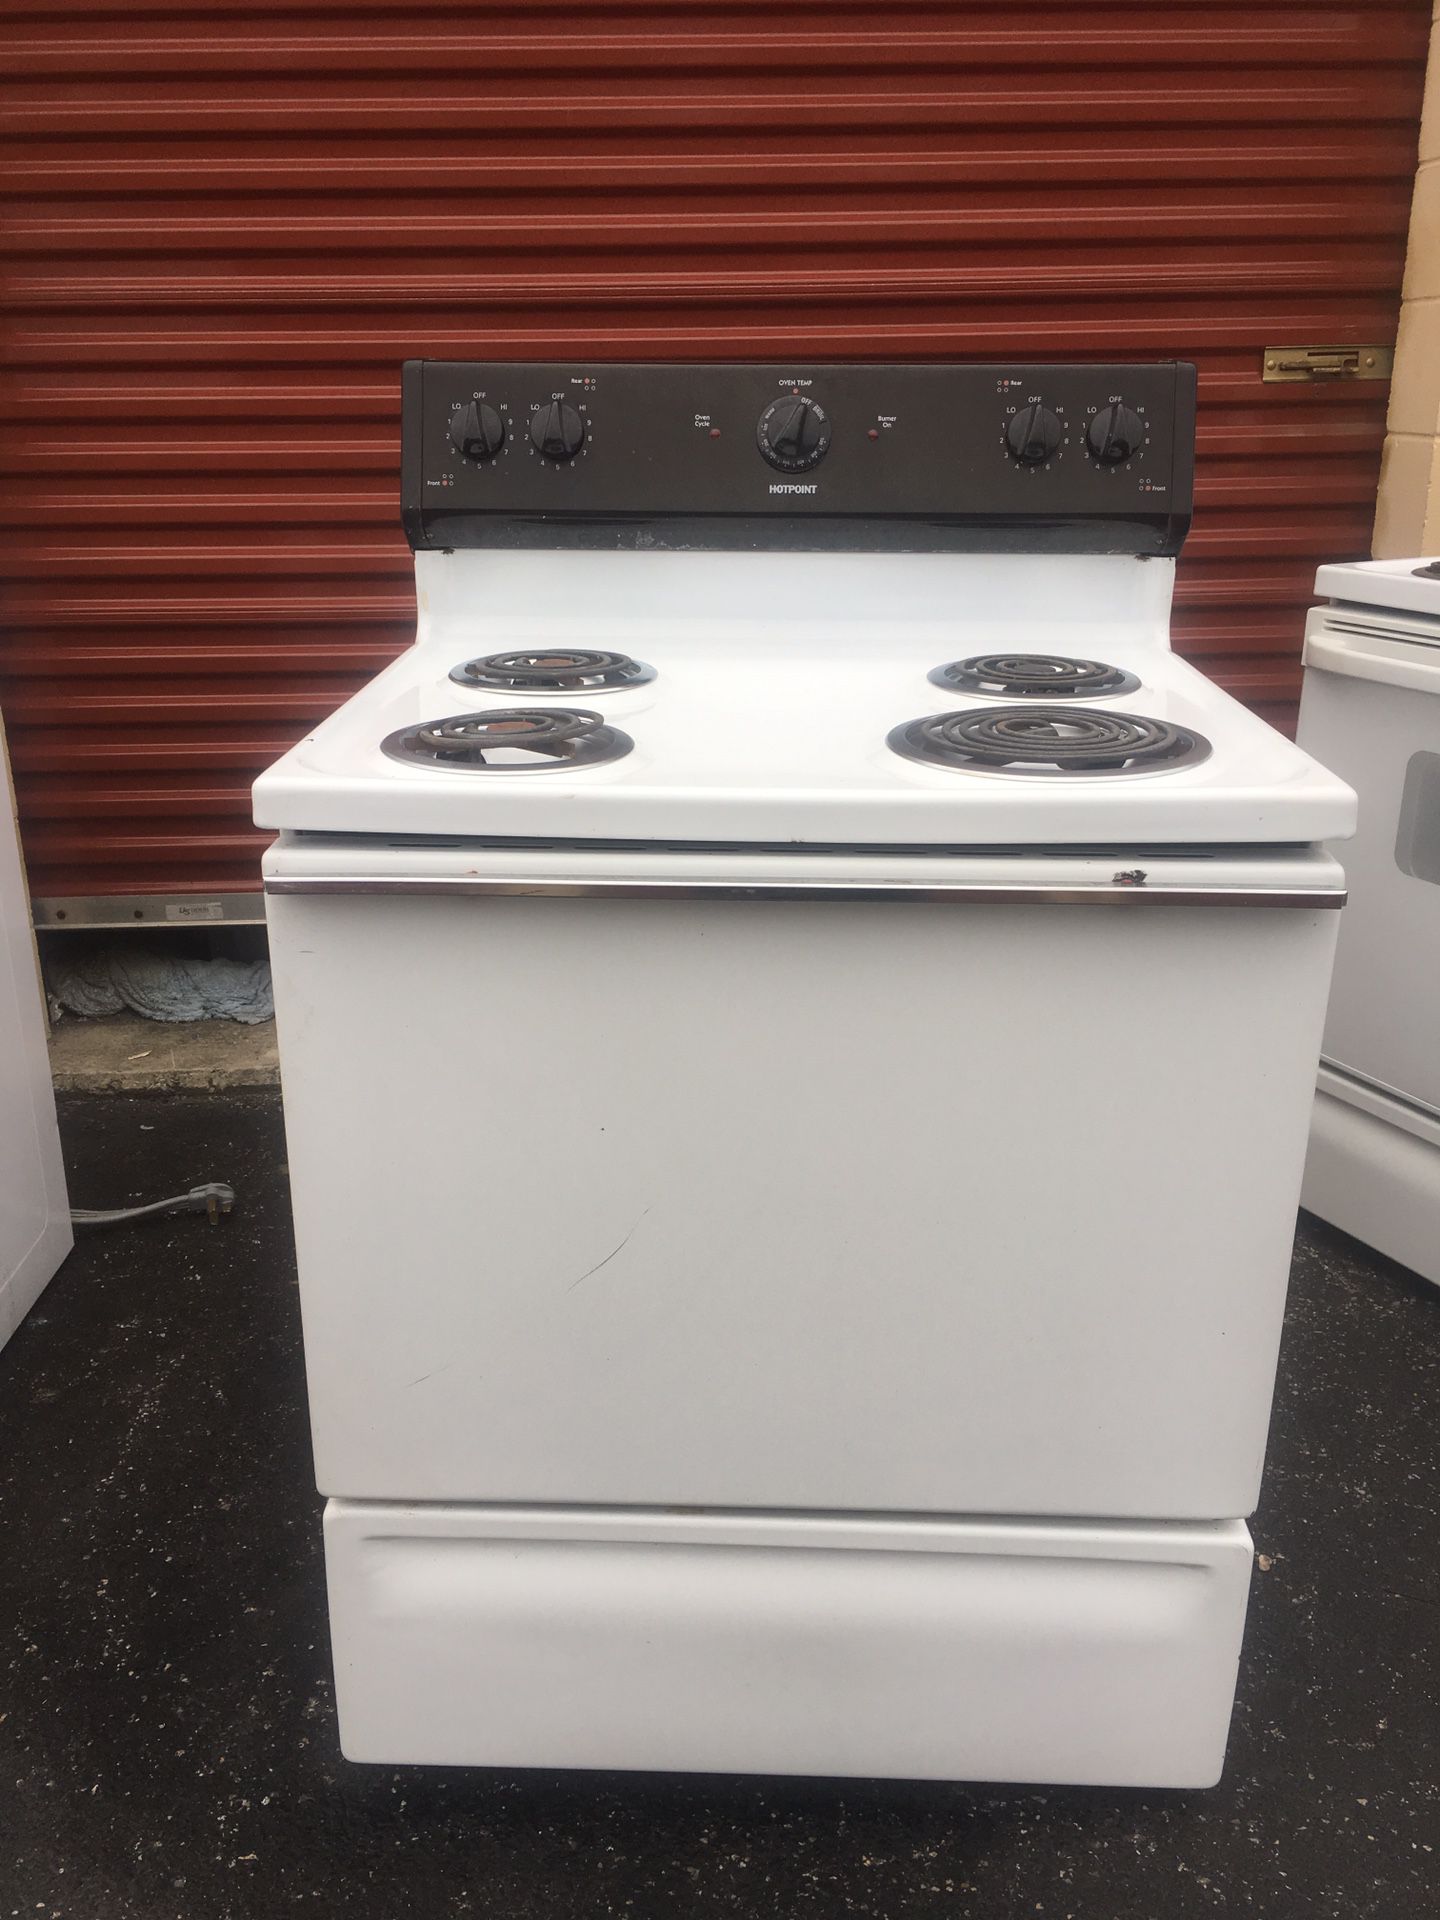 NICE CLEAN HOTPOINT BY GE 30” white stove.$100 Delivered/INSTALLED.$70 picked up.4 MONTH WARRANTY!